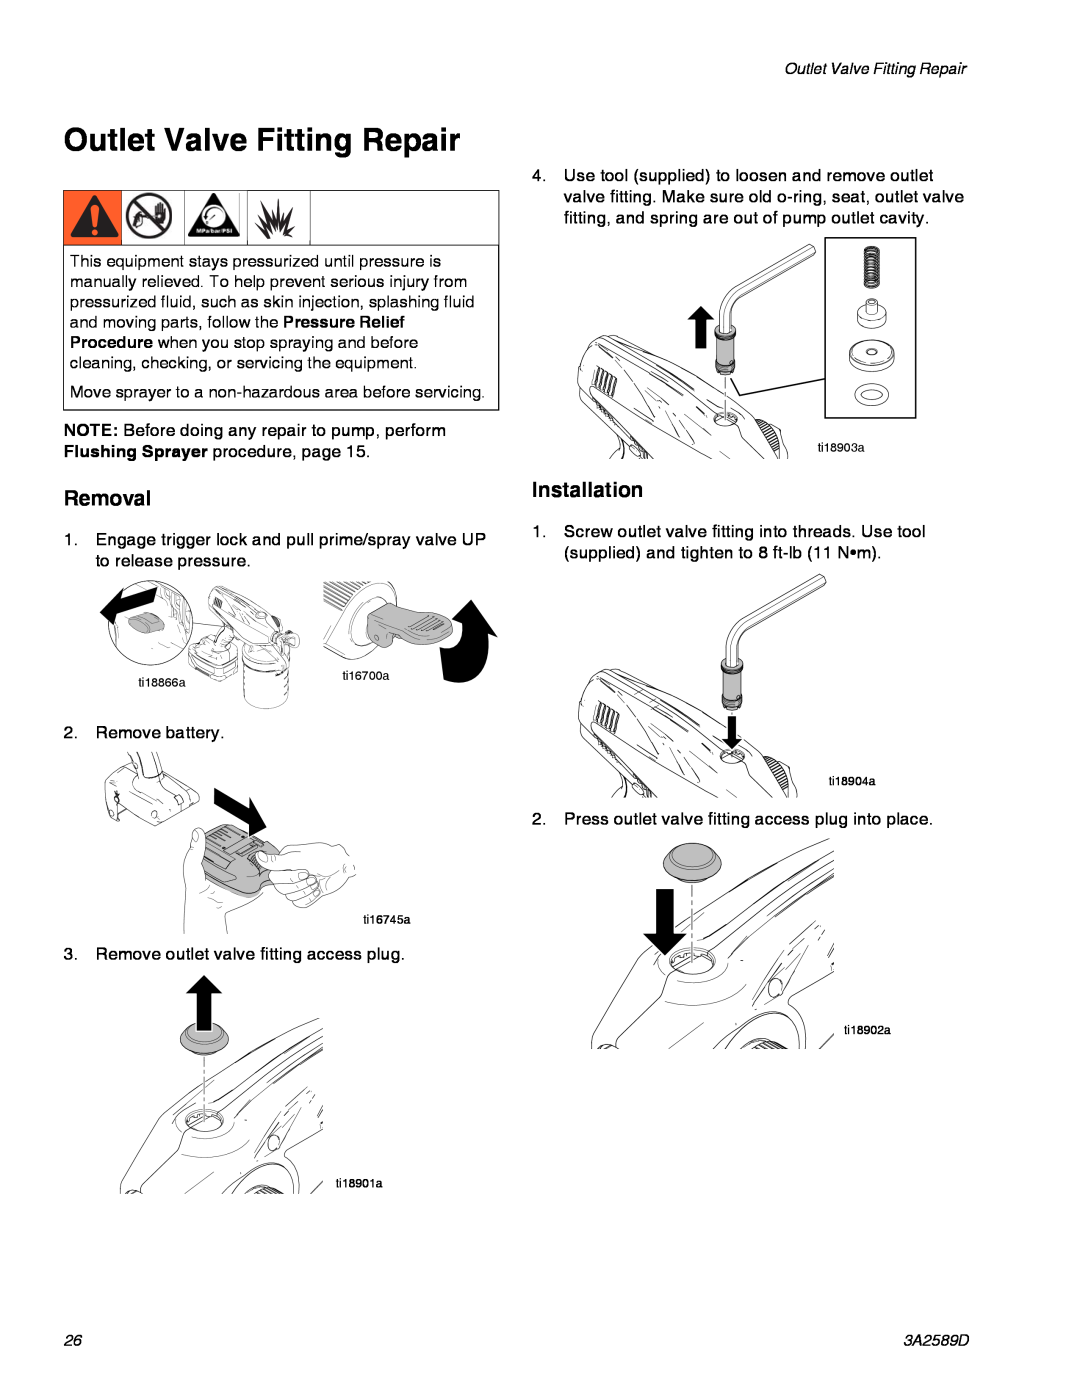 Graco 3A2589D important safety instructions Outlet Valve Fitting Repair, Removal, Installation 